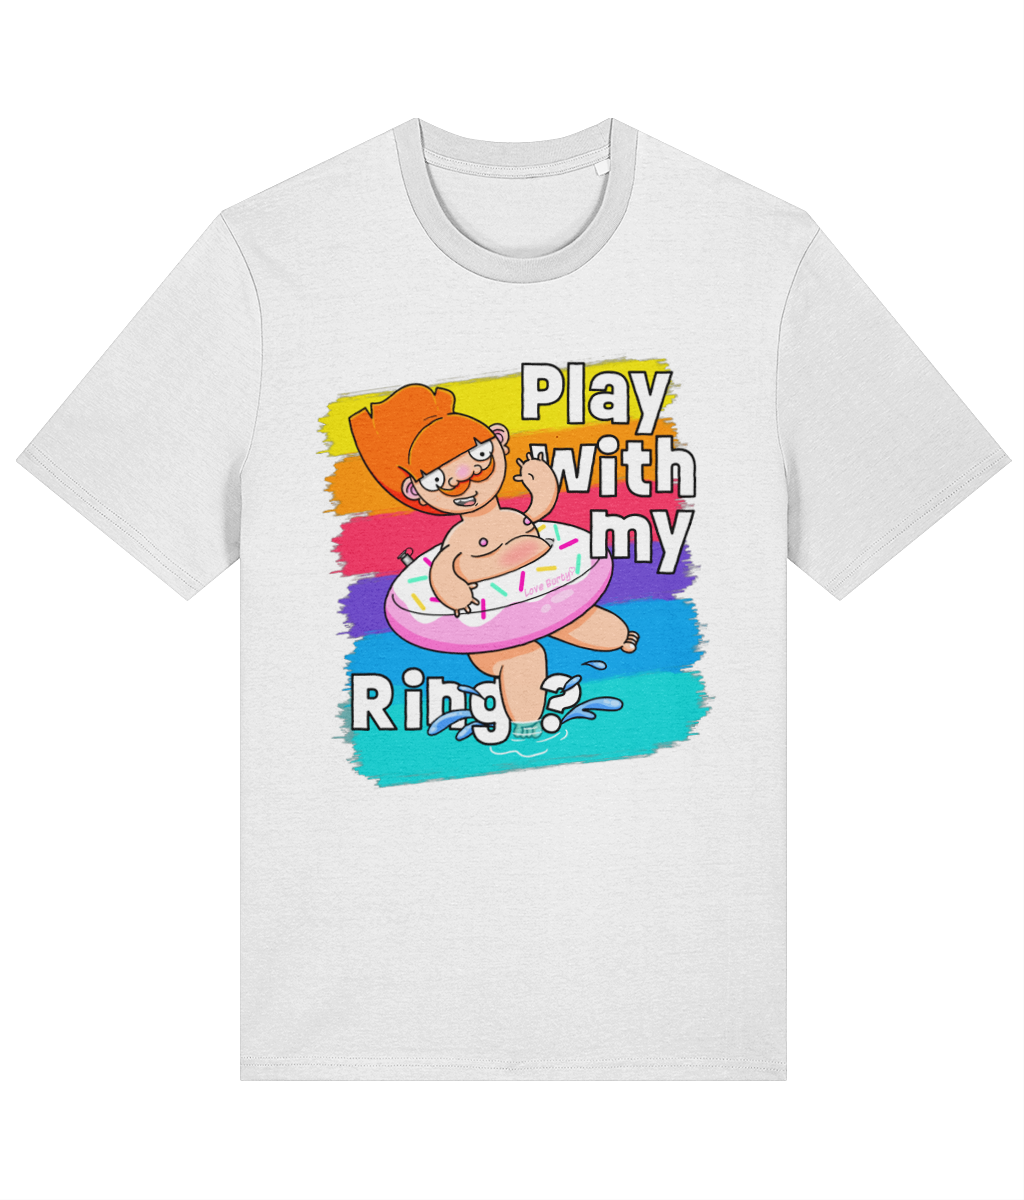 Play with my Ring? T-Shirt